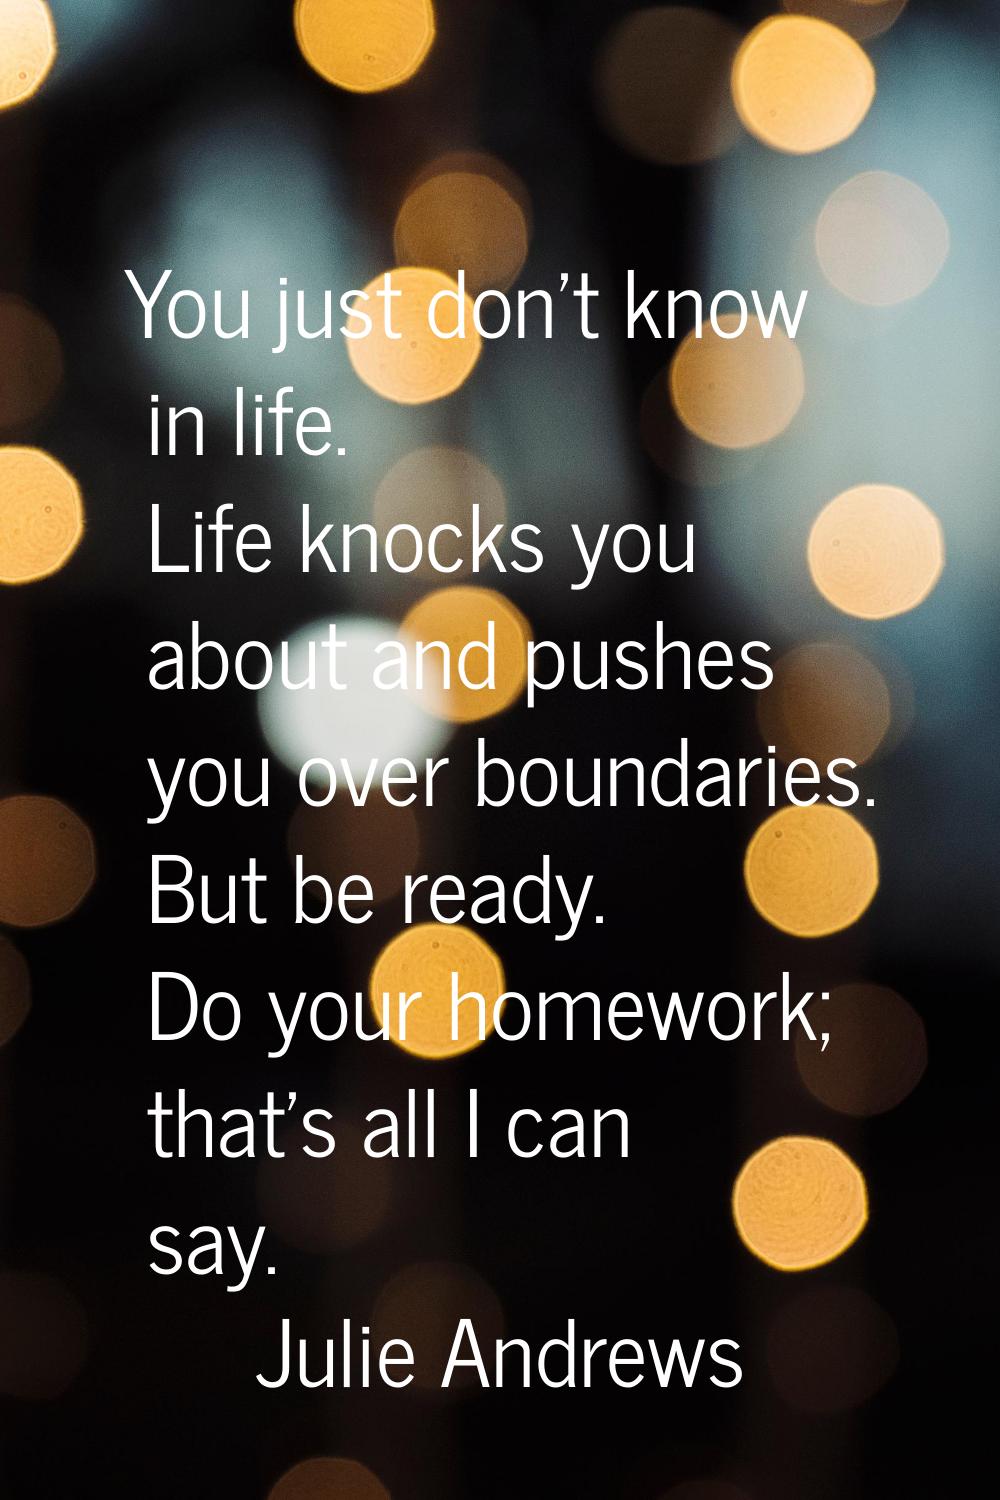 You just don't know in life. Life knocks you about and pushes you over boundaries. But be ready. Do